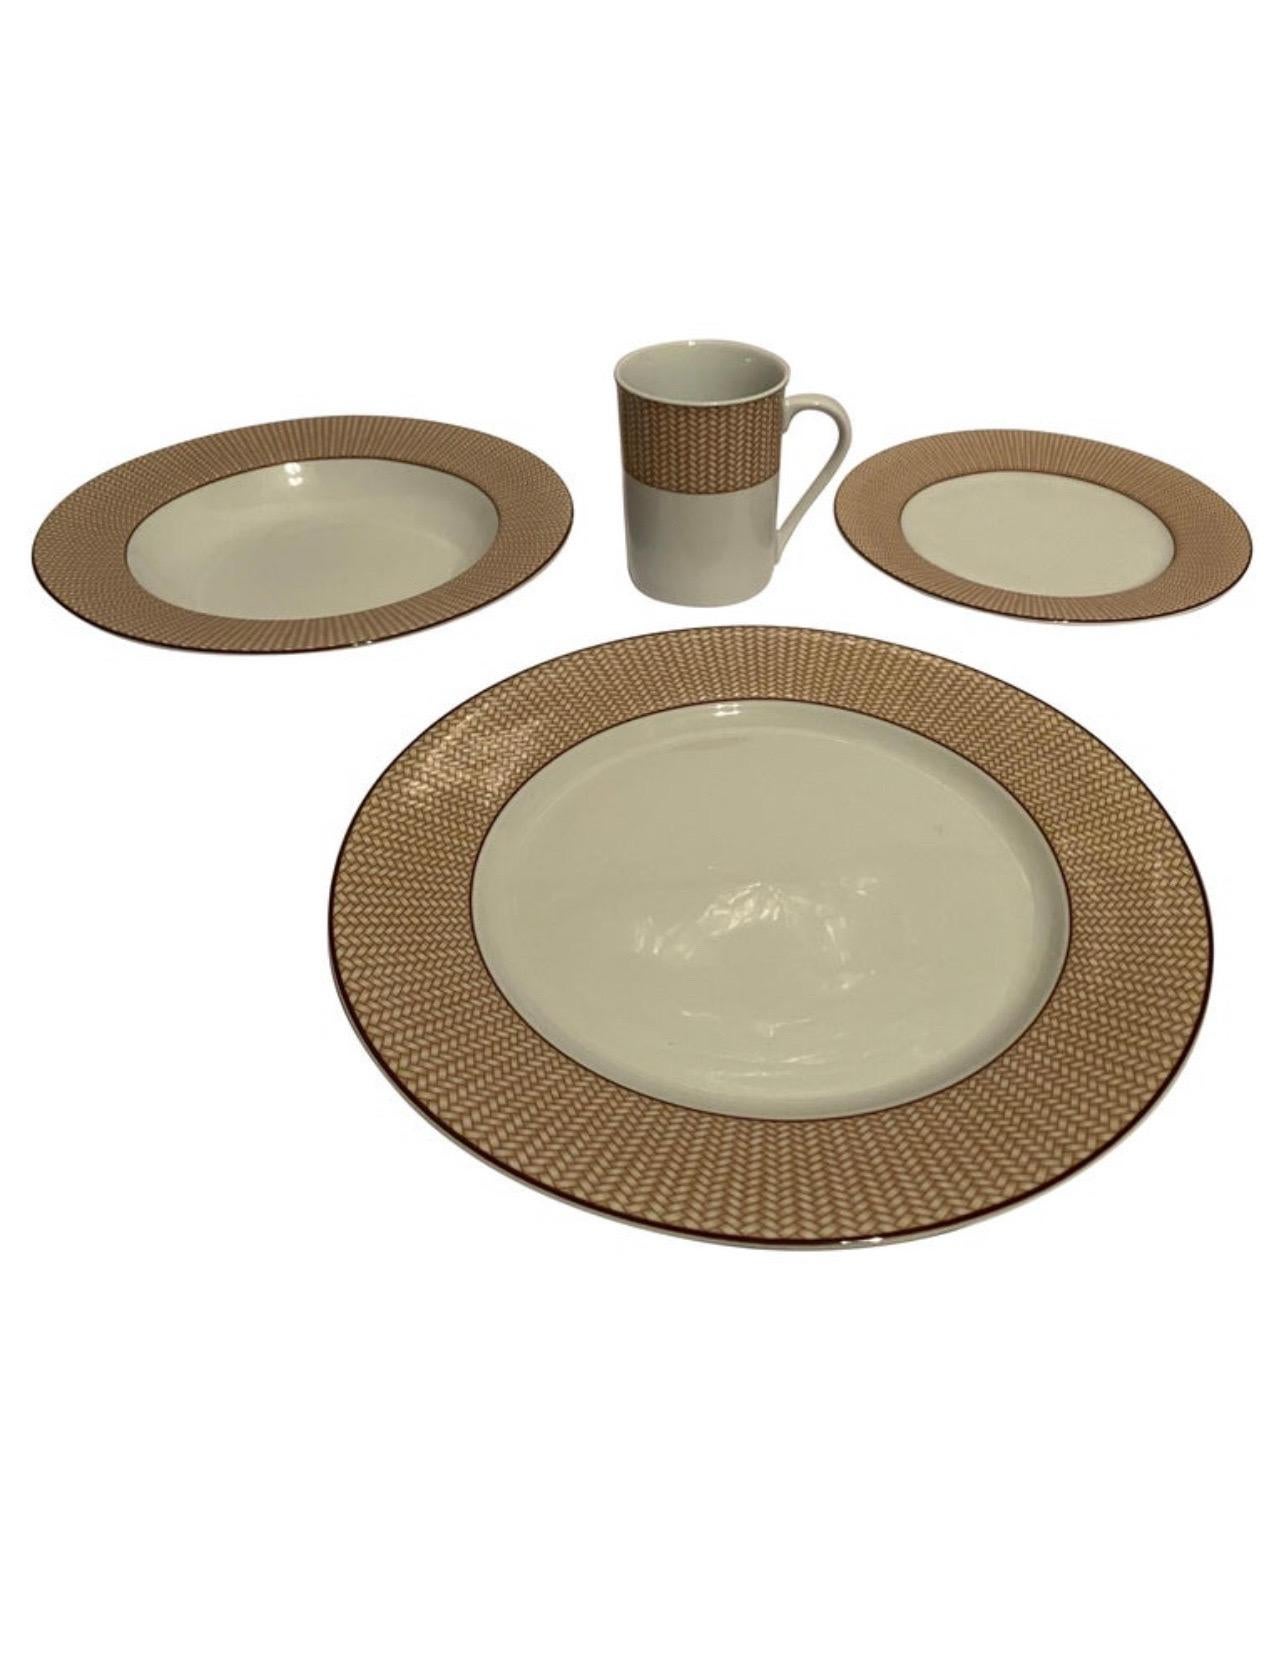 A 24 (twenty-four) piece set of dinnerware by Lauren/Ralph Lauren in the Reed Natural pattern.

Features a tan wicker patterned border on white complemented by brown trim.

Includes the following 24 pieces:
4 Dinner plates
4 Salad plates
8 Rimmed